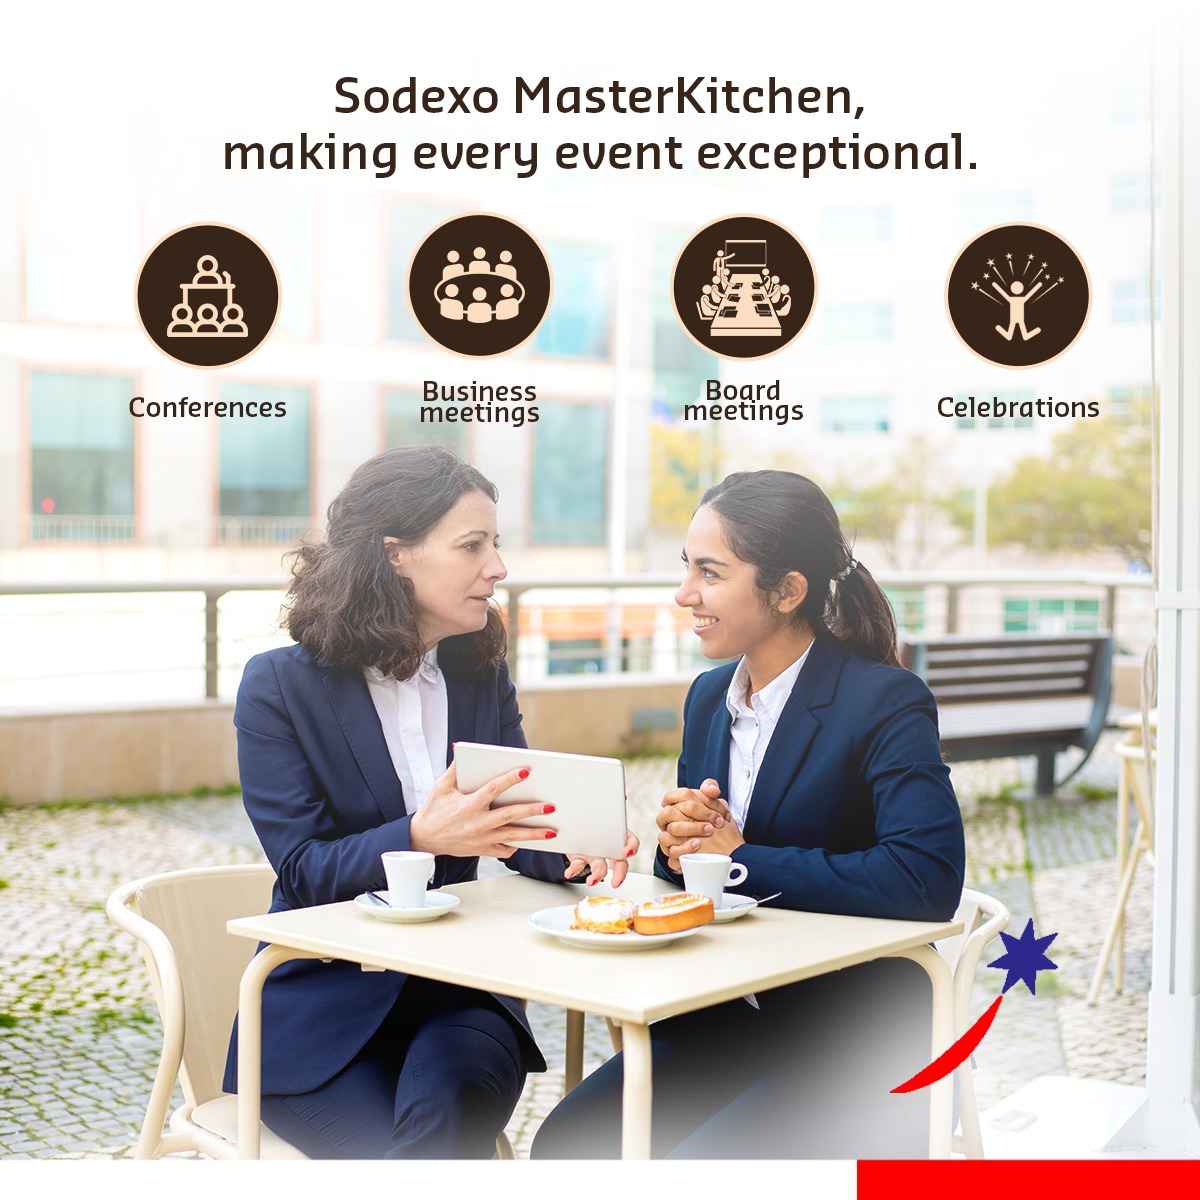 Offering proactive event solutions for corporate excellence. Specially crafted cuisine, personalised service, and a holistic approach ensure unforgettable, experiences at your events. Know more - bit.ly/3rkIhdf Sodexo MasterKitchen is now in Hyderabad! #Sodexo